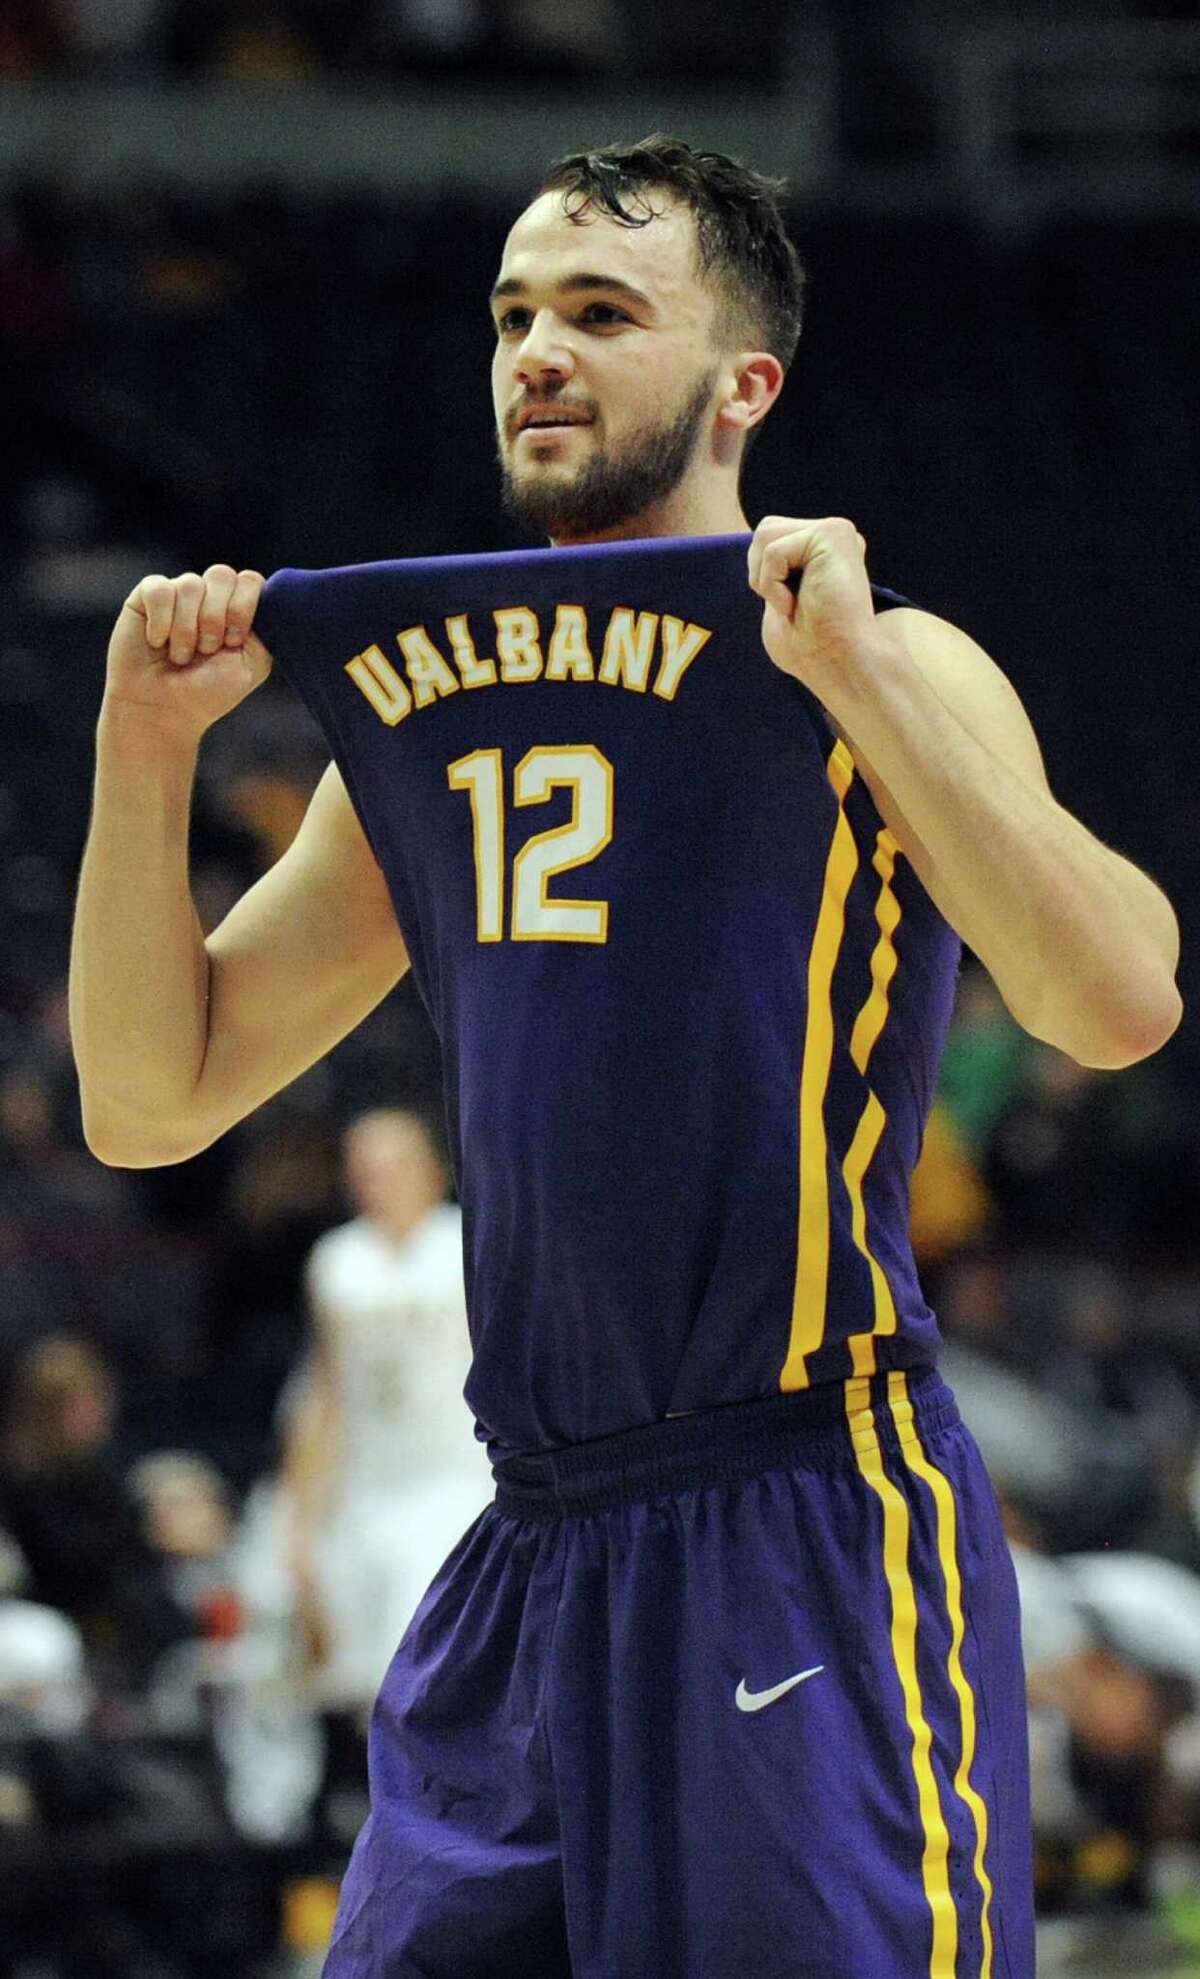 UAlbany's Peter Hooley shows his jersey to his fans when they win 77-68 over Siena during their basketball game on Saturday Dec. 13, 2014, at Times Union Center in Albany, N.Y. (Cindy Schultz / Times Union)